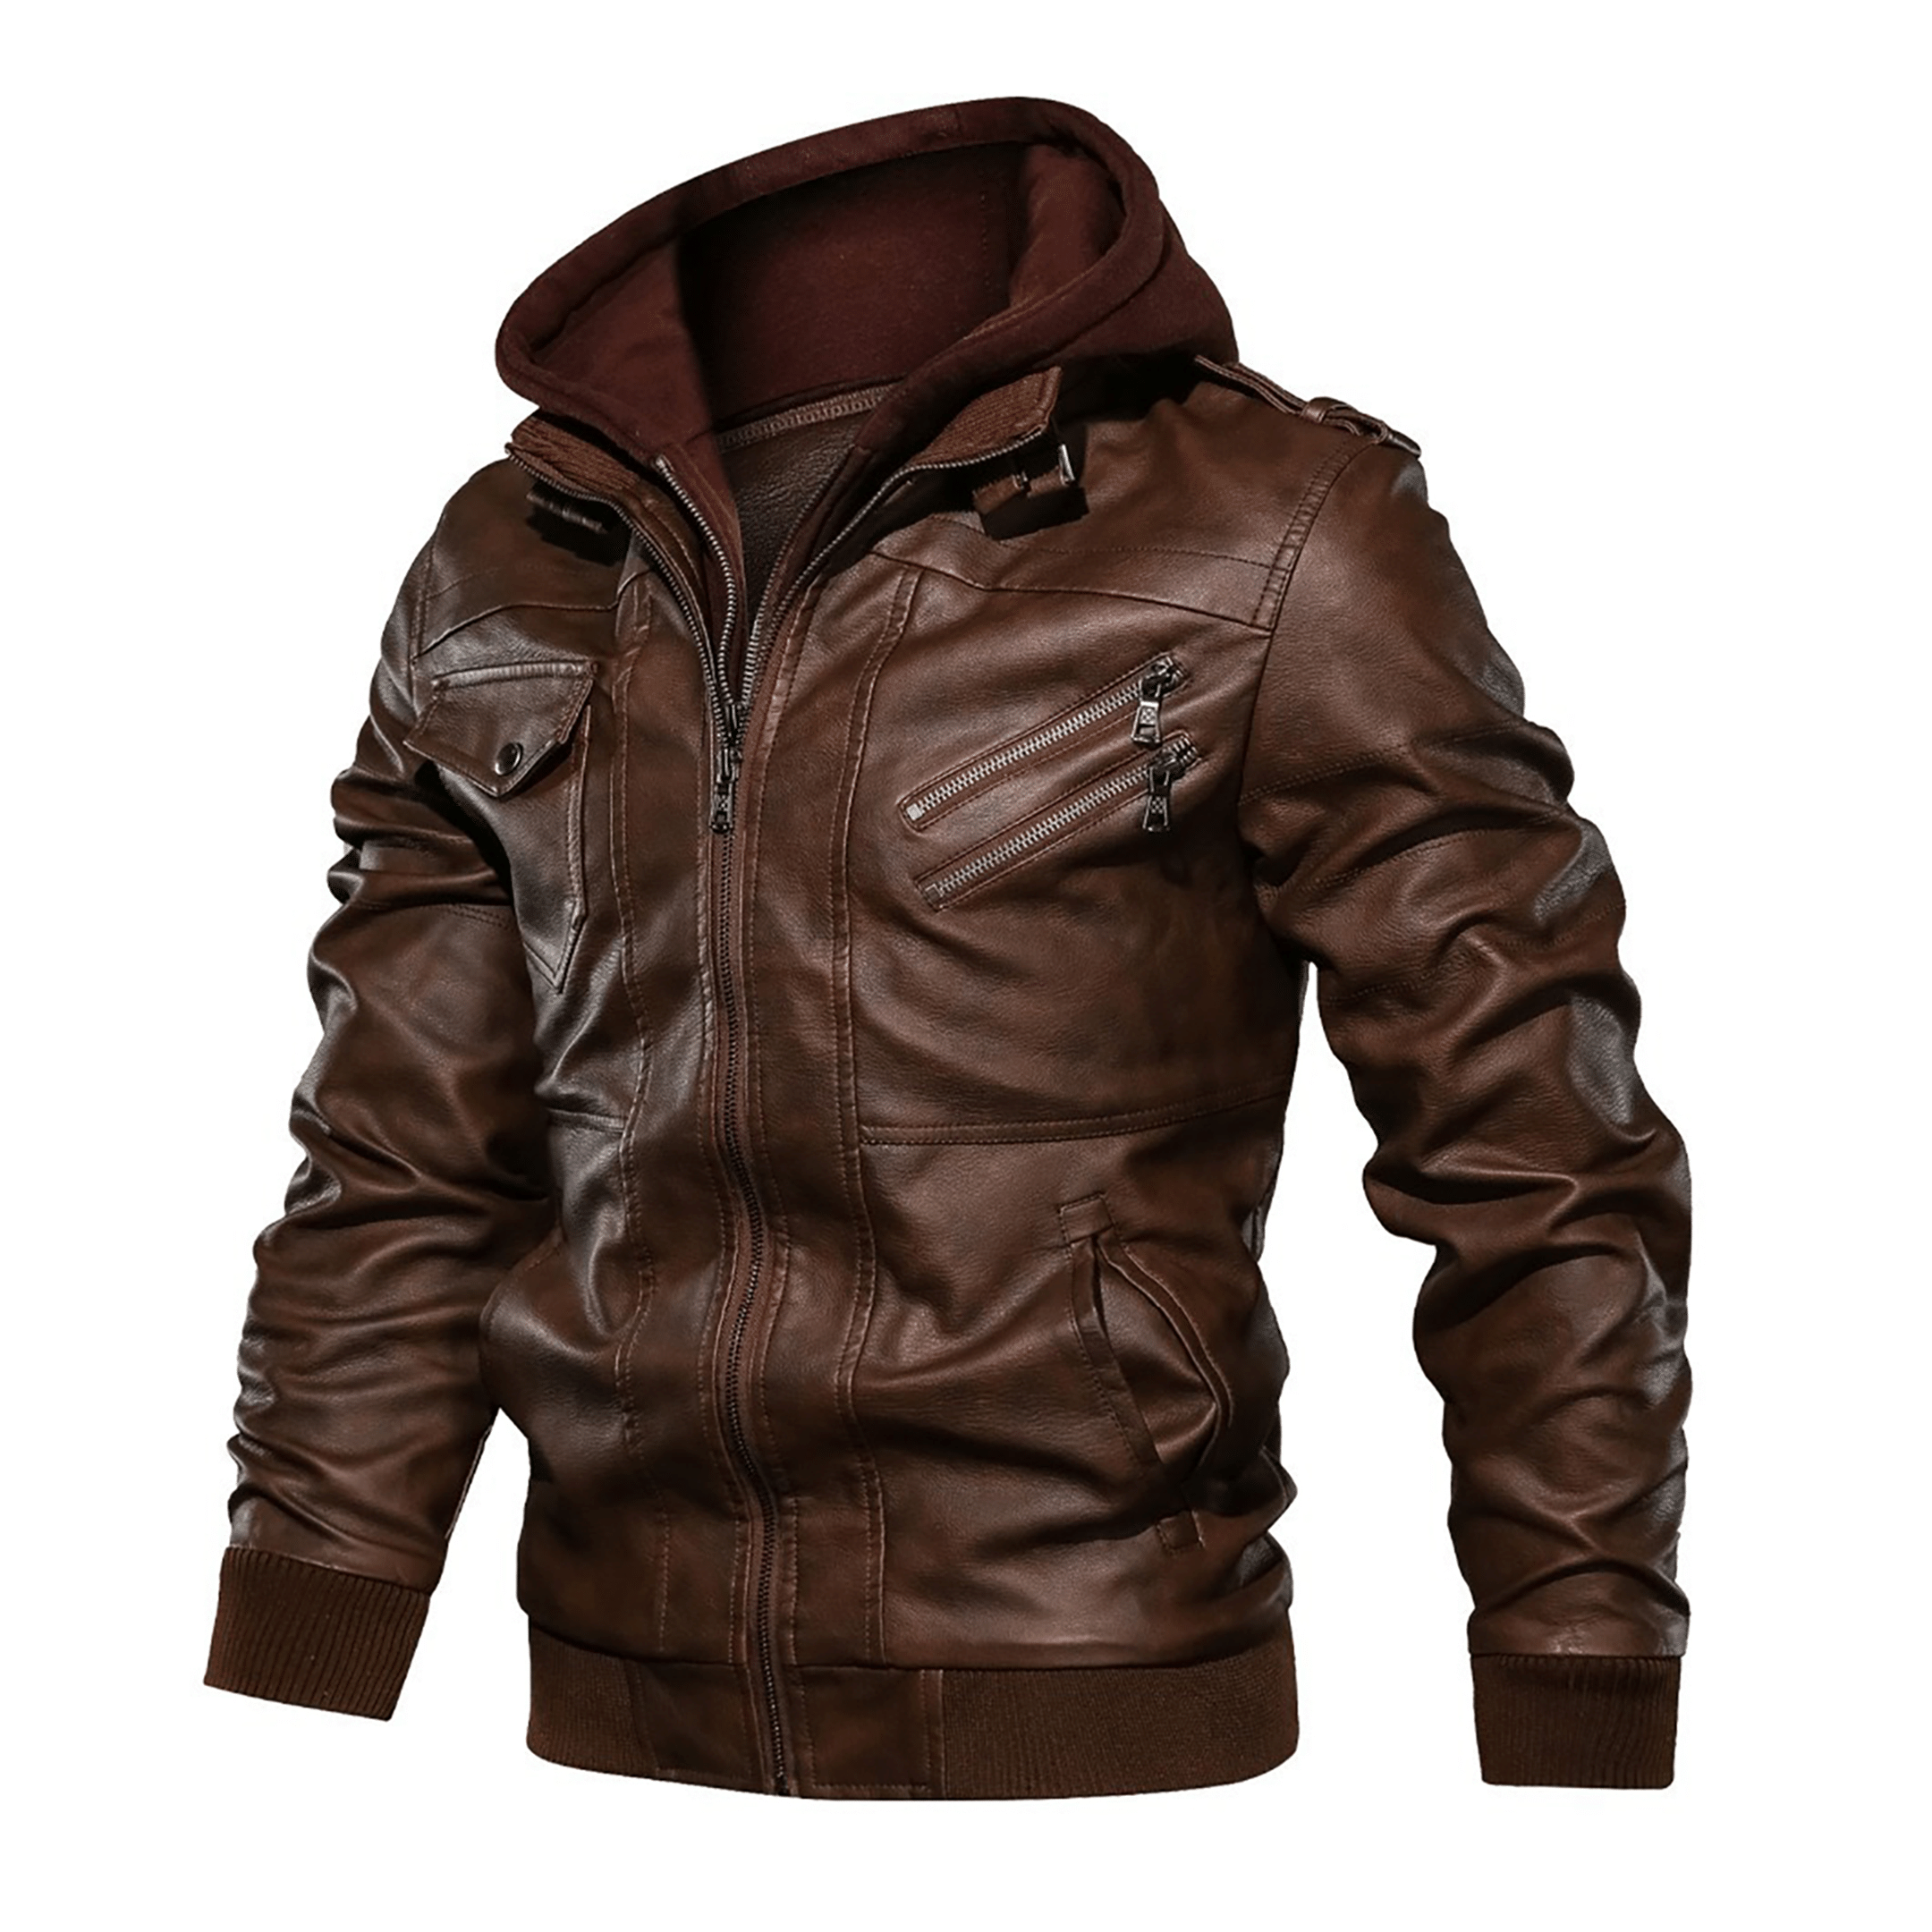 Top leather jackets and latest products 391